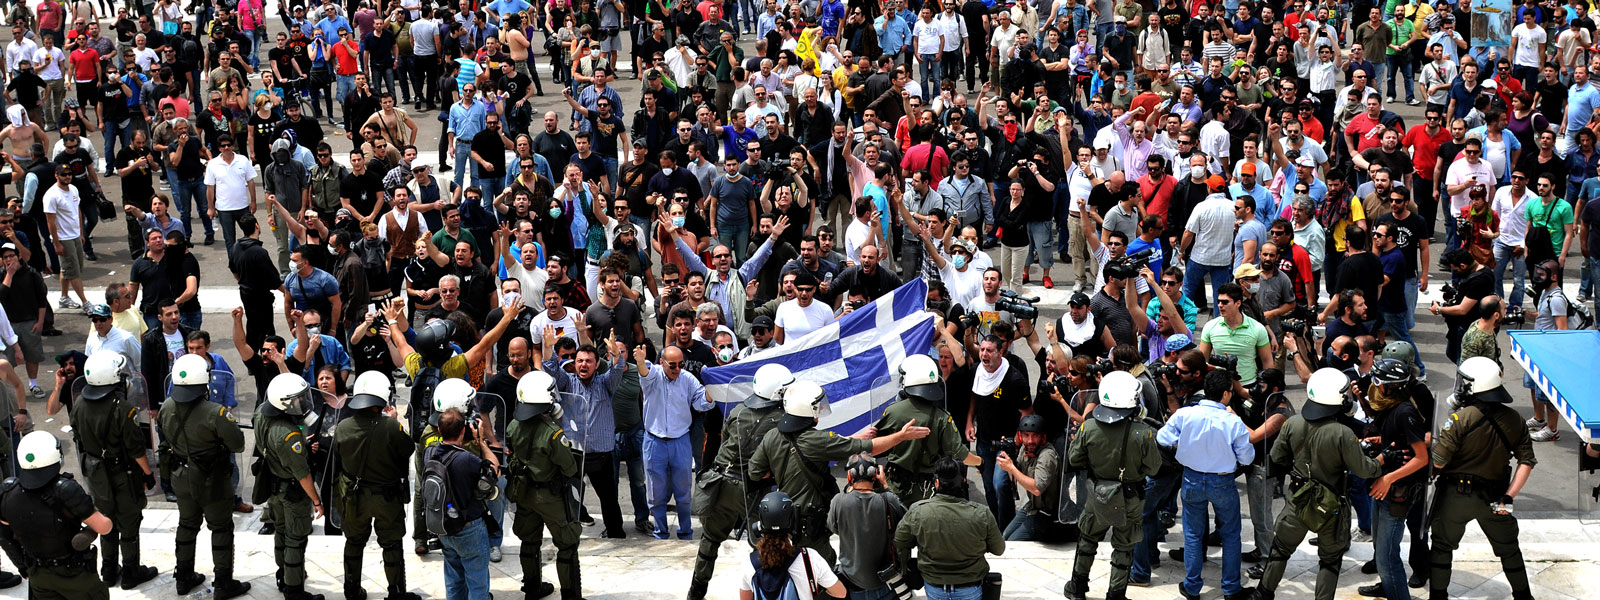 Protesters in Greece